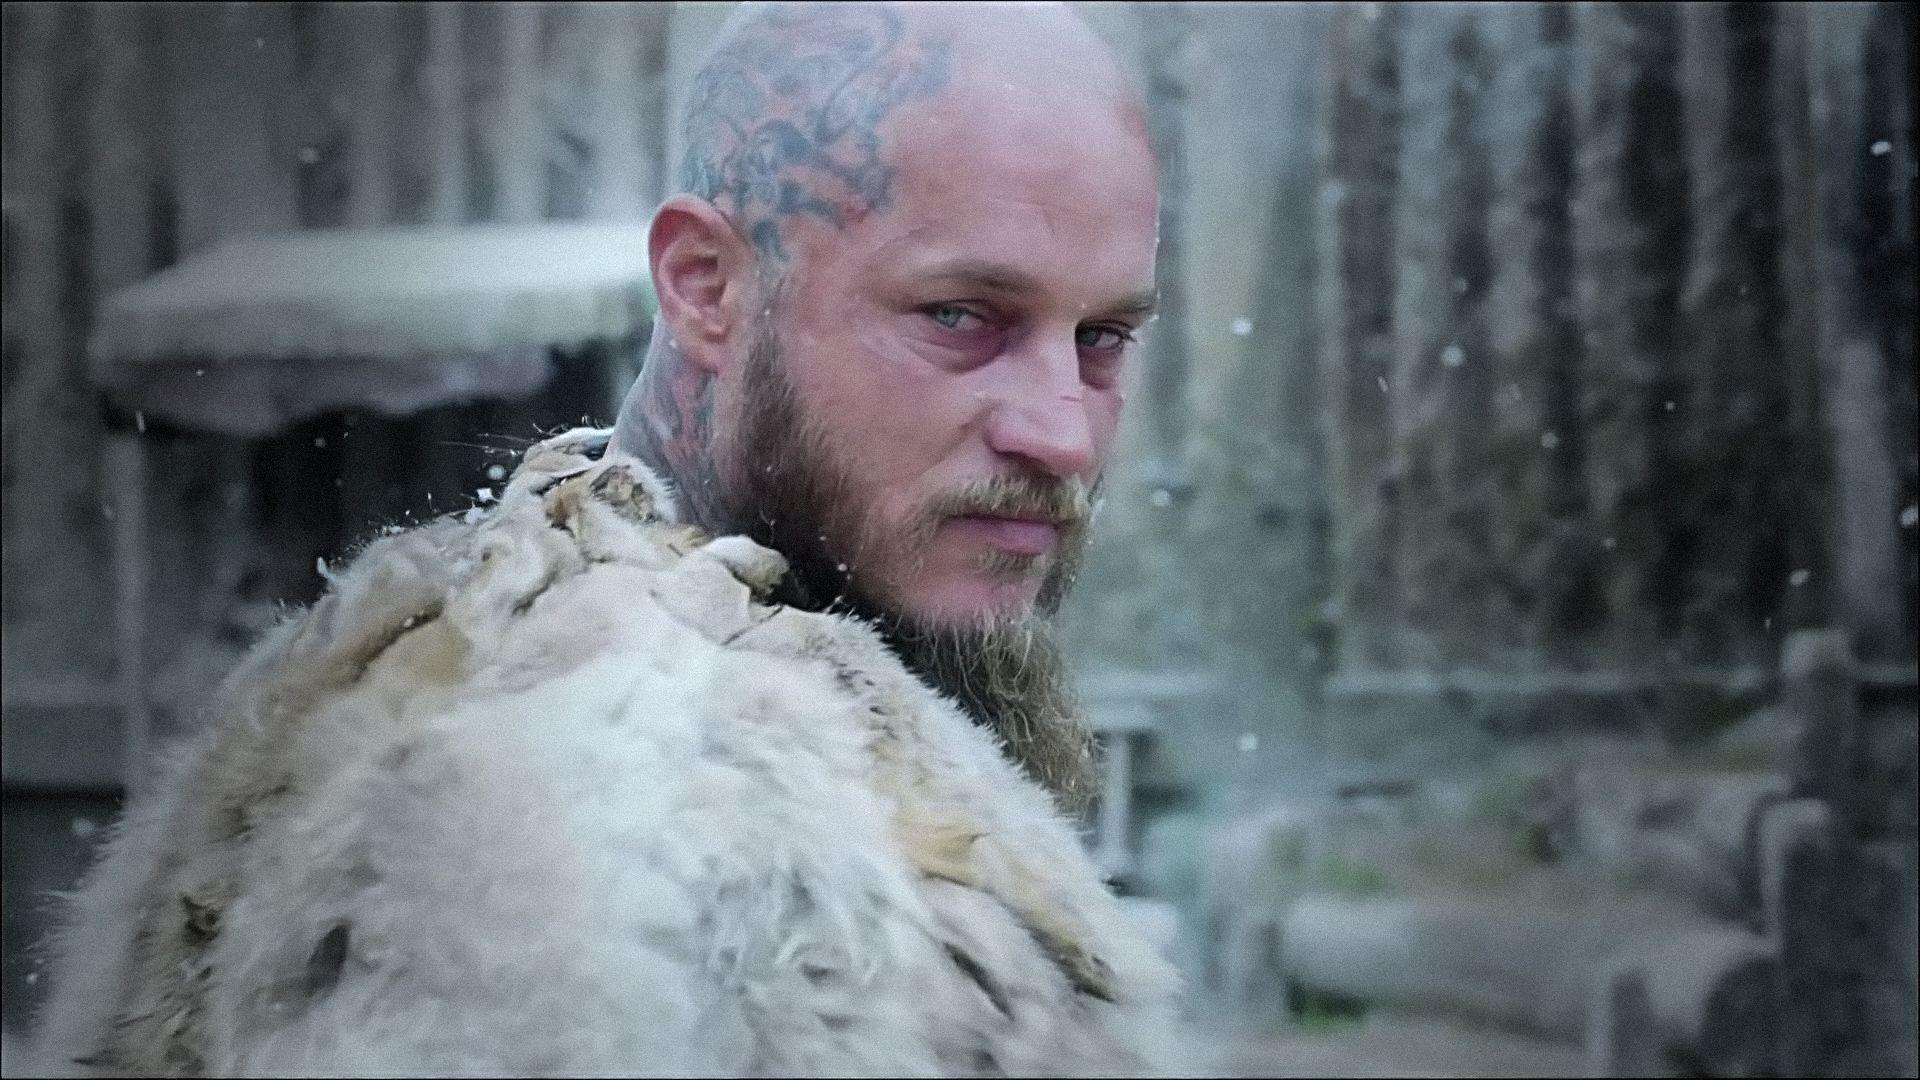 Vikings season 4 official trailer and a pack of wallpaper. Movie